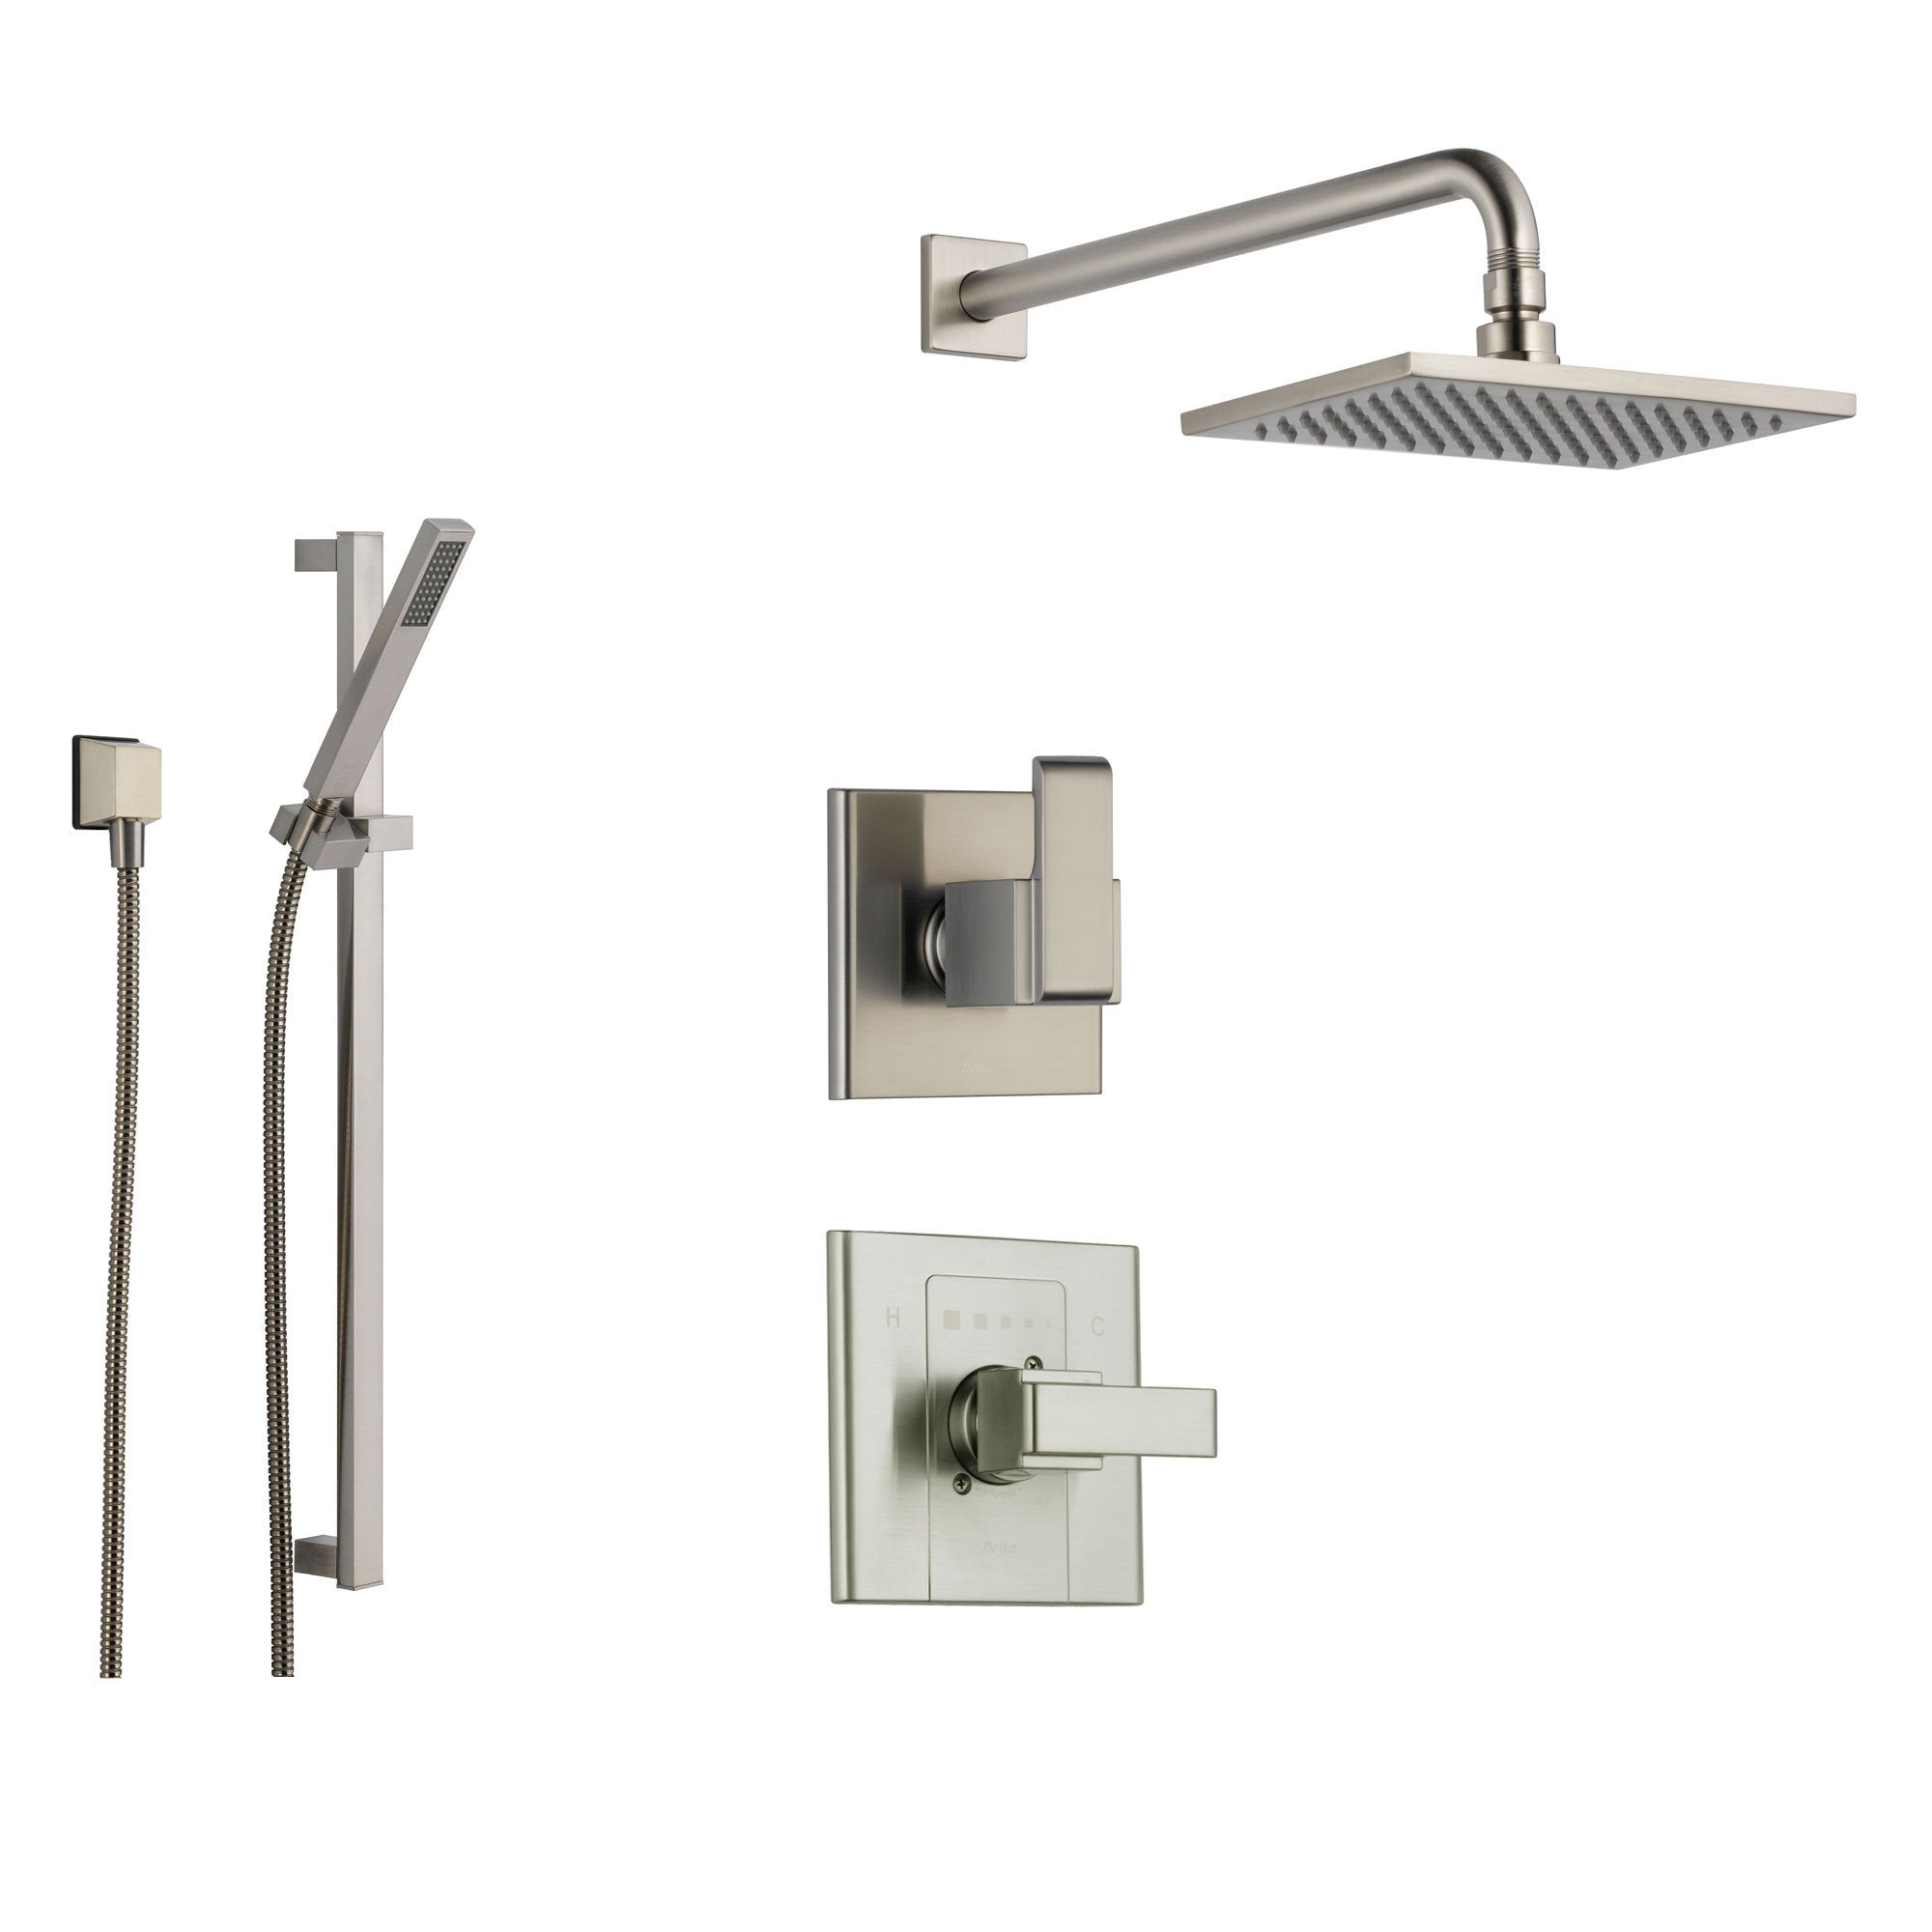 Delta Arzo Stainless Steel Shower System with Normal Shower Handle, 3-setting Diverter, Square Rain Showerhead and Modern Handheld Shower SS148682SS